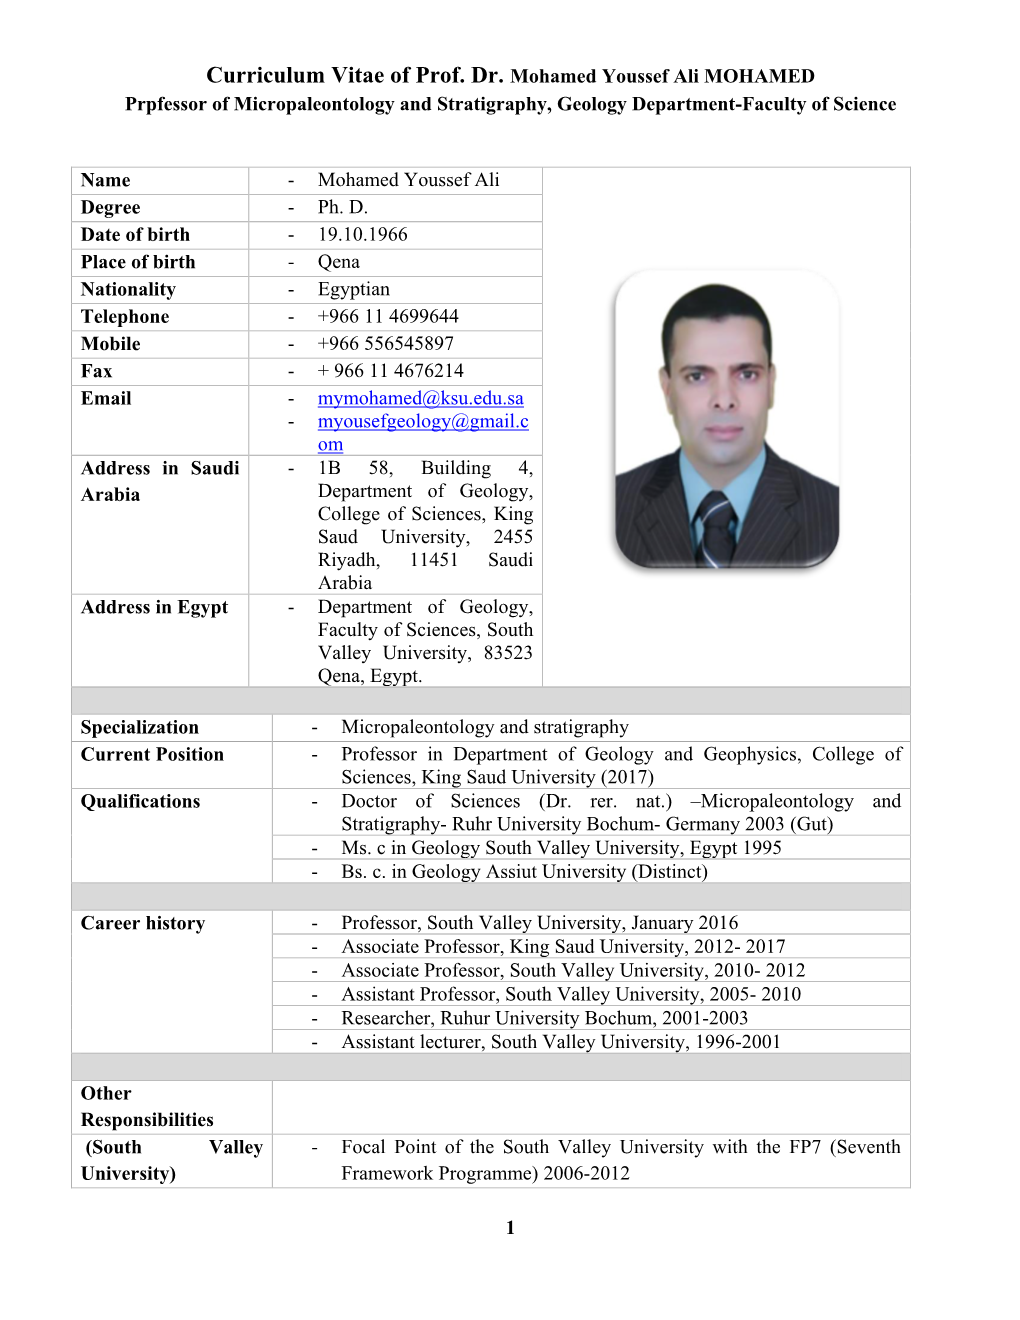 Curriculum Vitae of Prof. Dr. Mohamed Youssef Ali MOHAMED Prpfessor of Micropaleontology and Stratigraphy, Geology Department-Faculty of Science